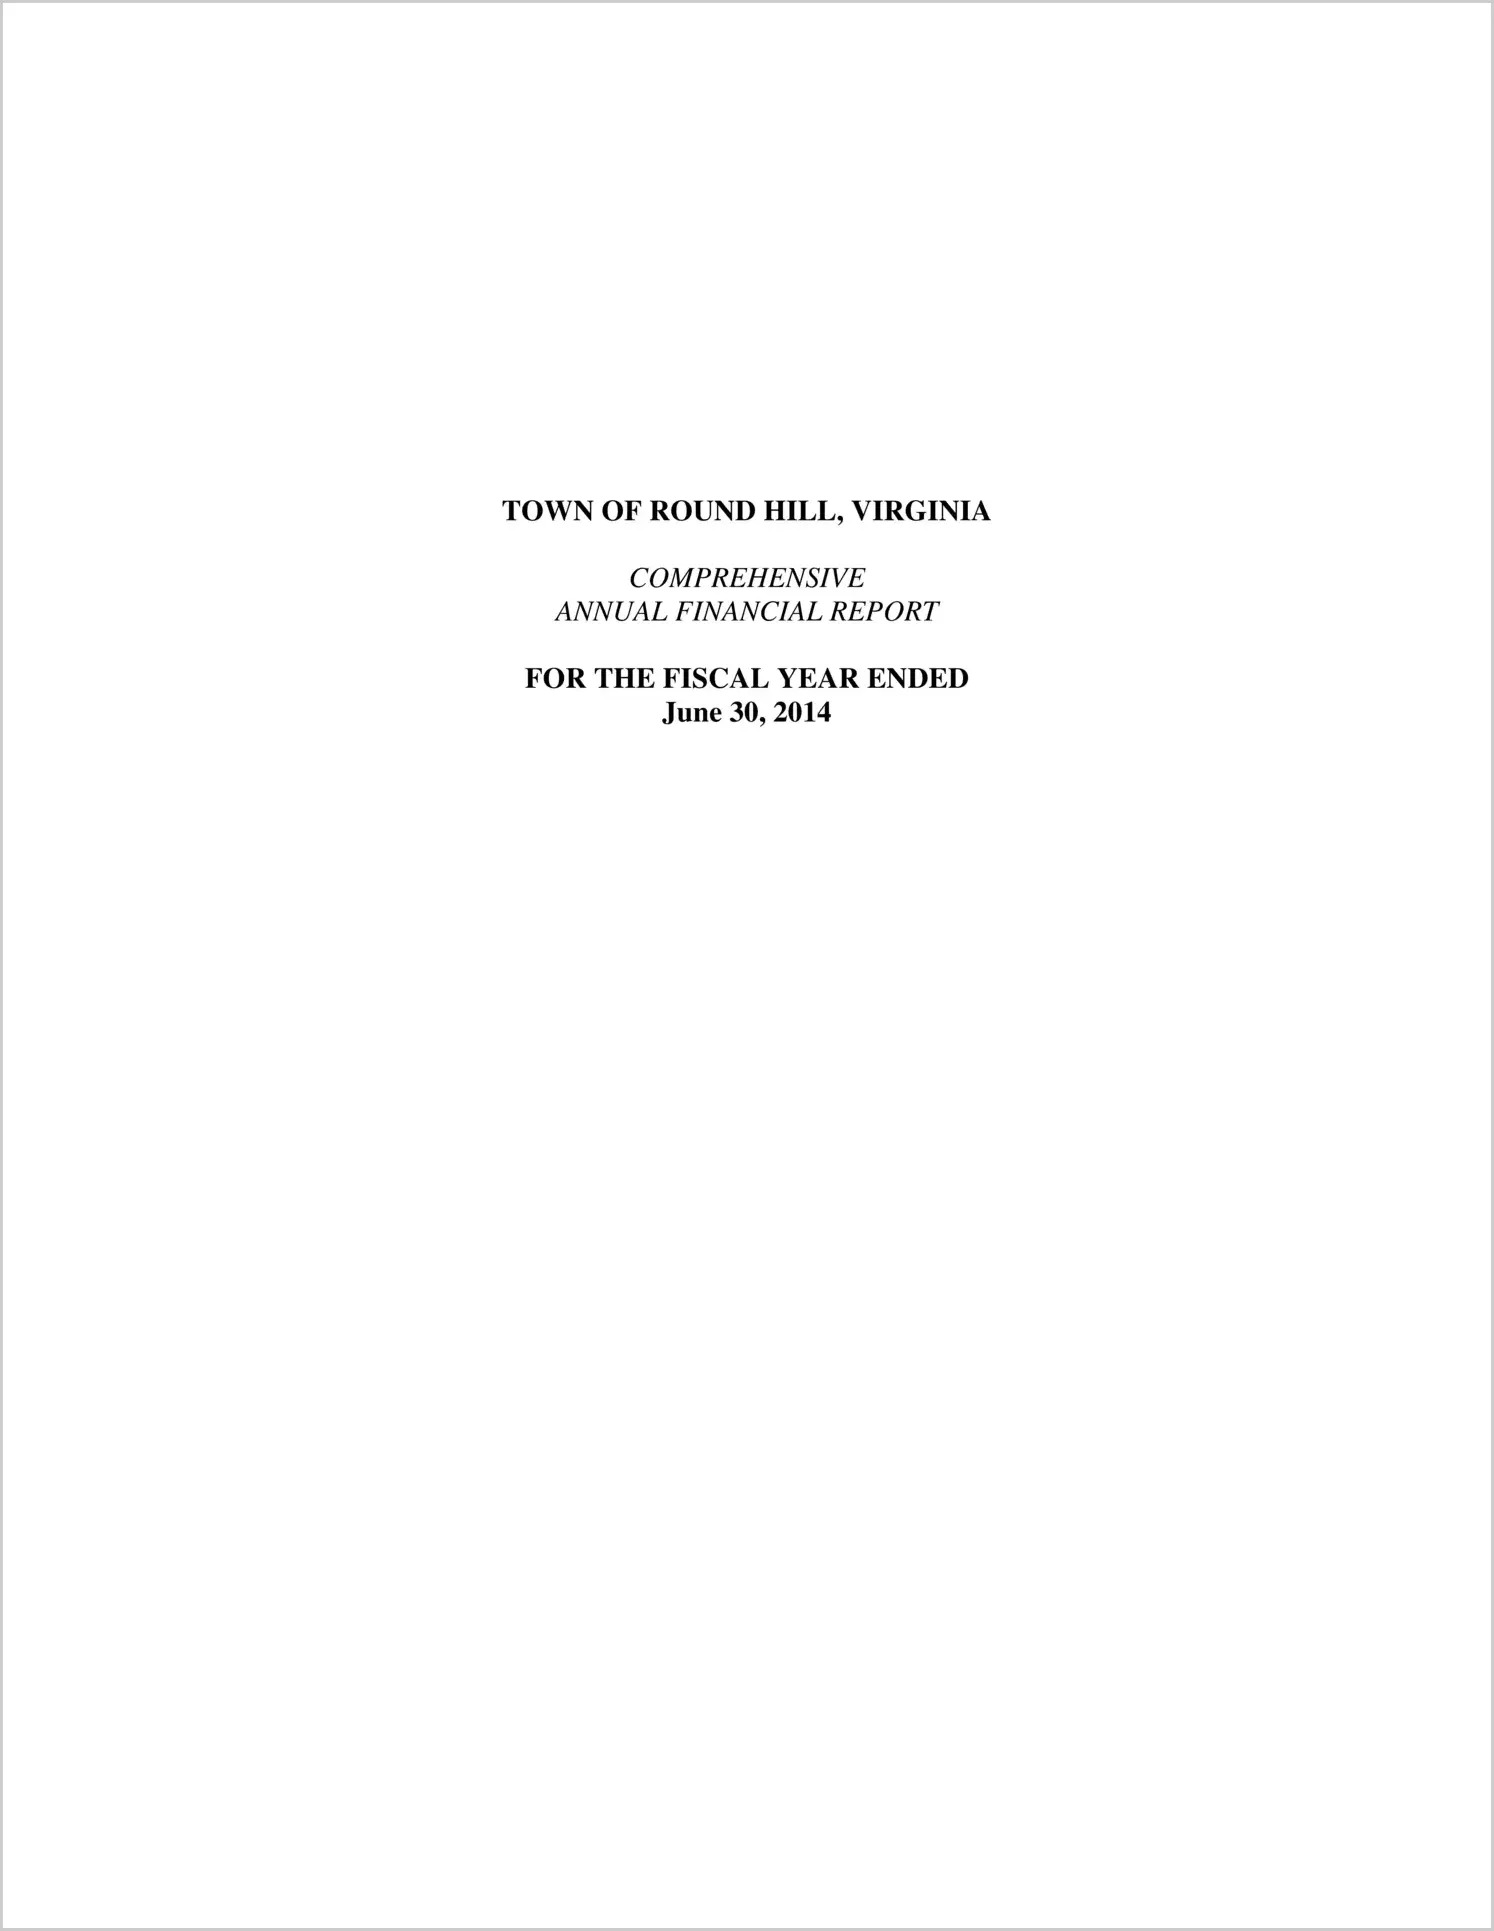 2014 Annual Financial Report for Town of Round Hill